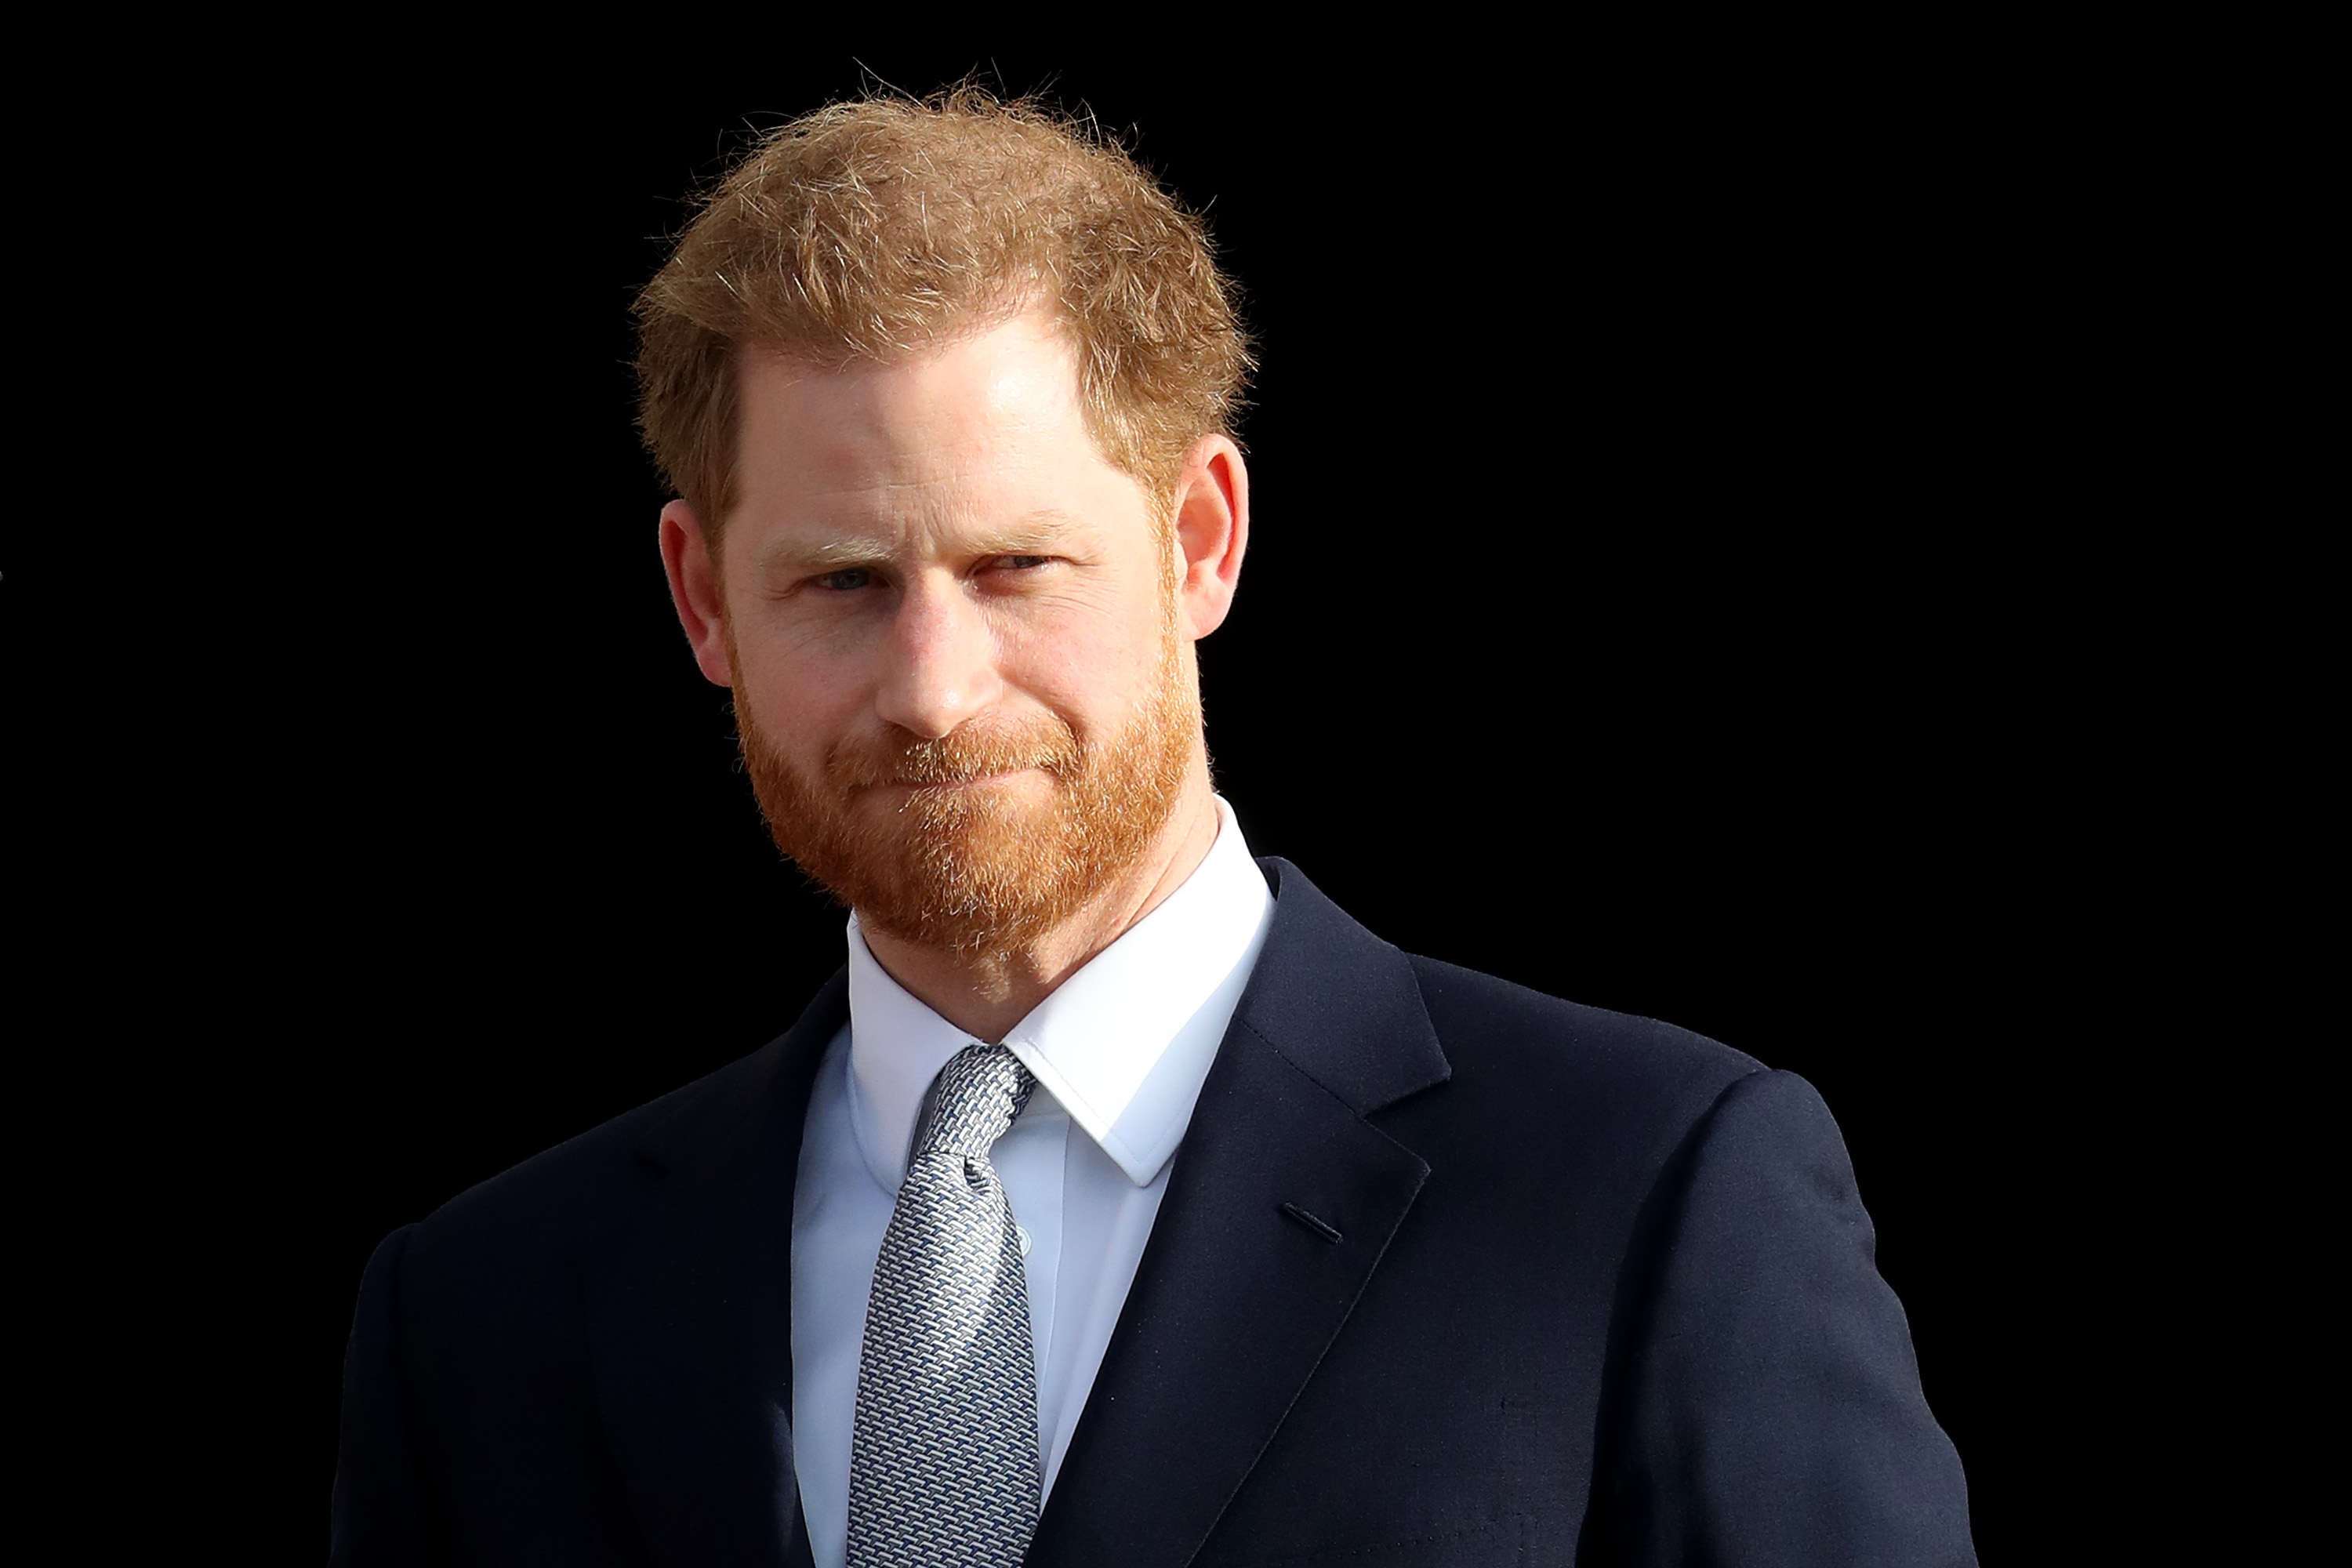 Photo of Prince Harry dressed in a suit as he hosts the Rugby League World Cup draws